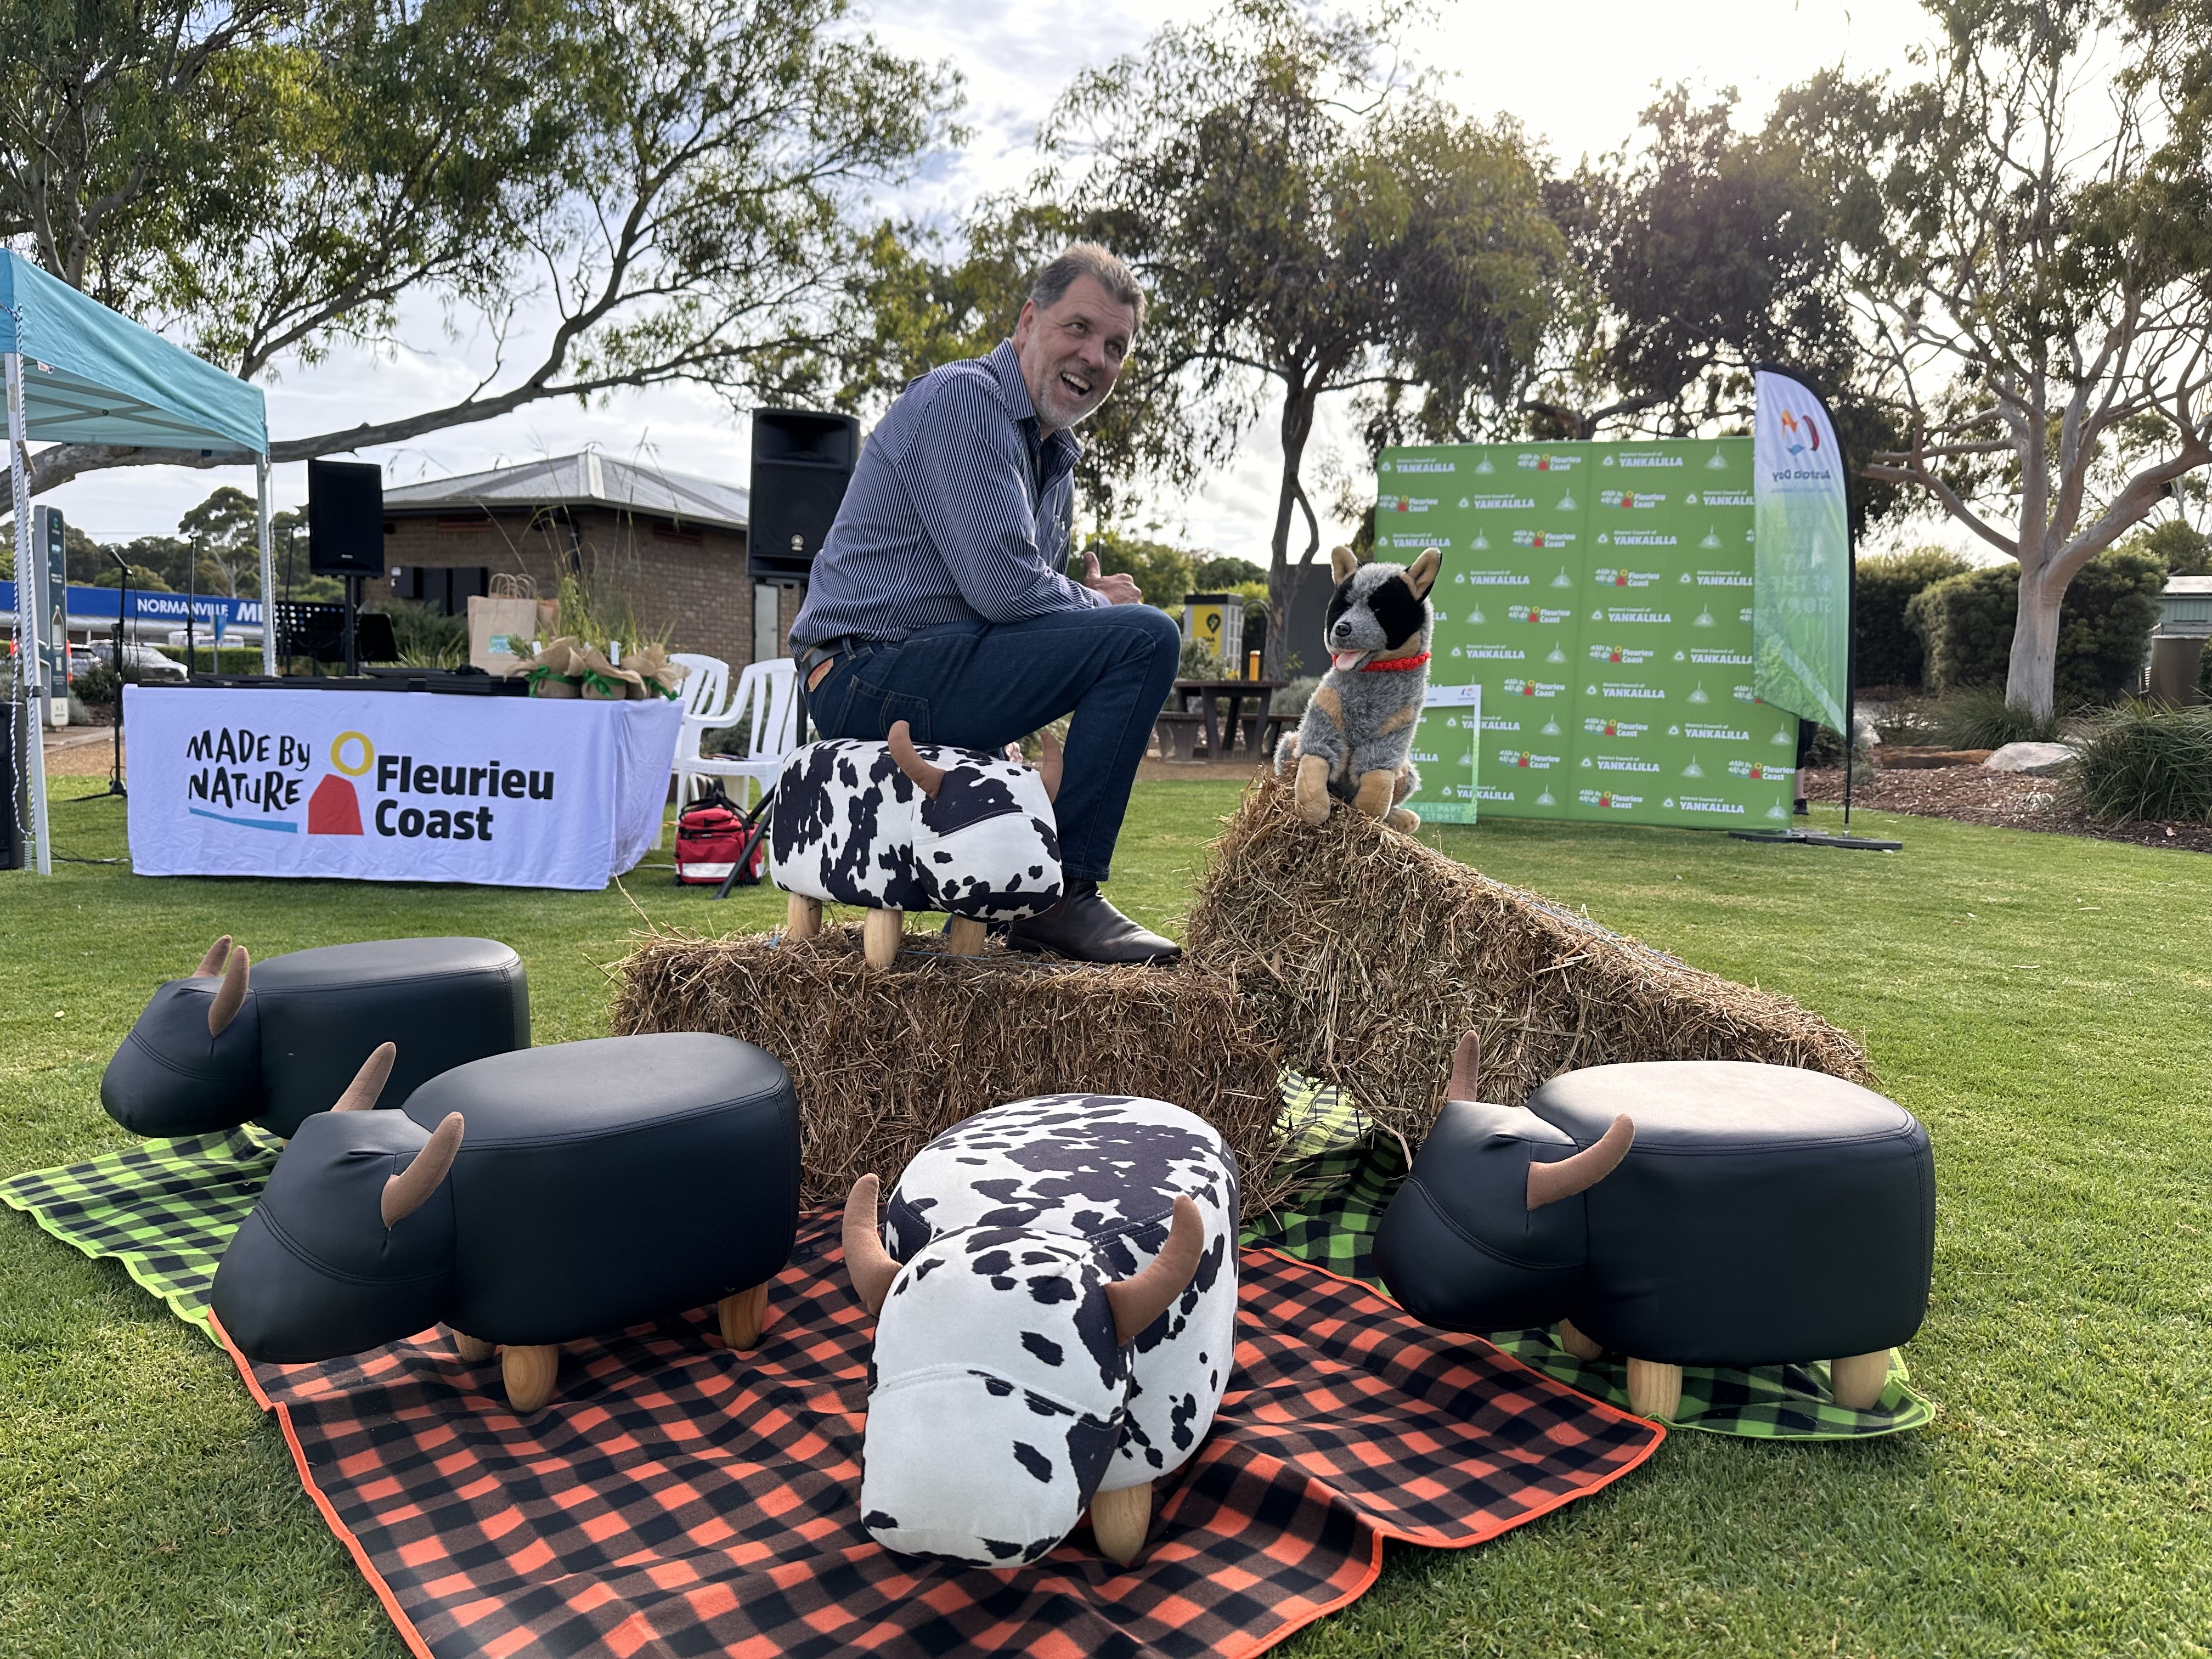 Mayor Houston sitting on a pile of toy cows